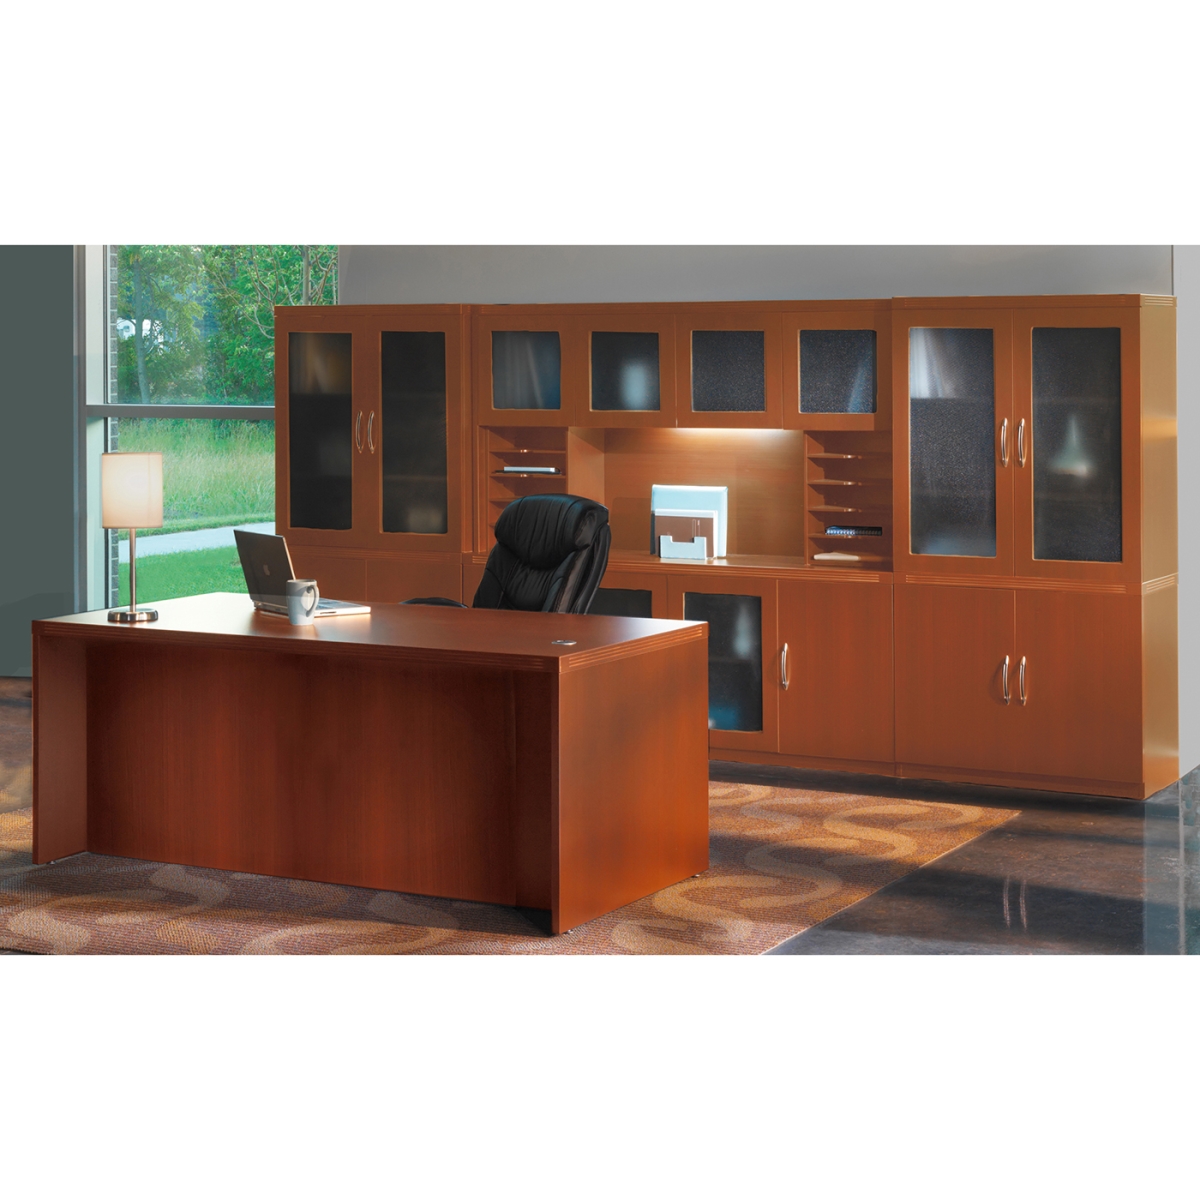 At35lcr 12 X 8 Ft. Aberdeen Series Suite 35 Executive Desk, Cherry